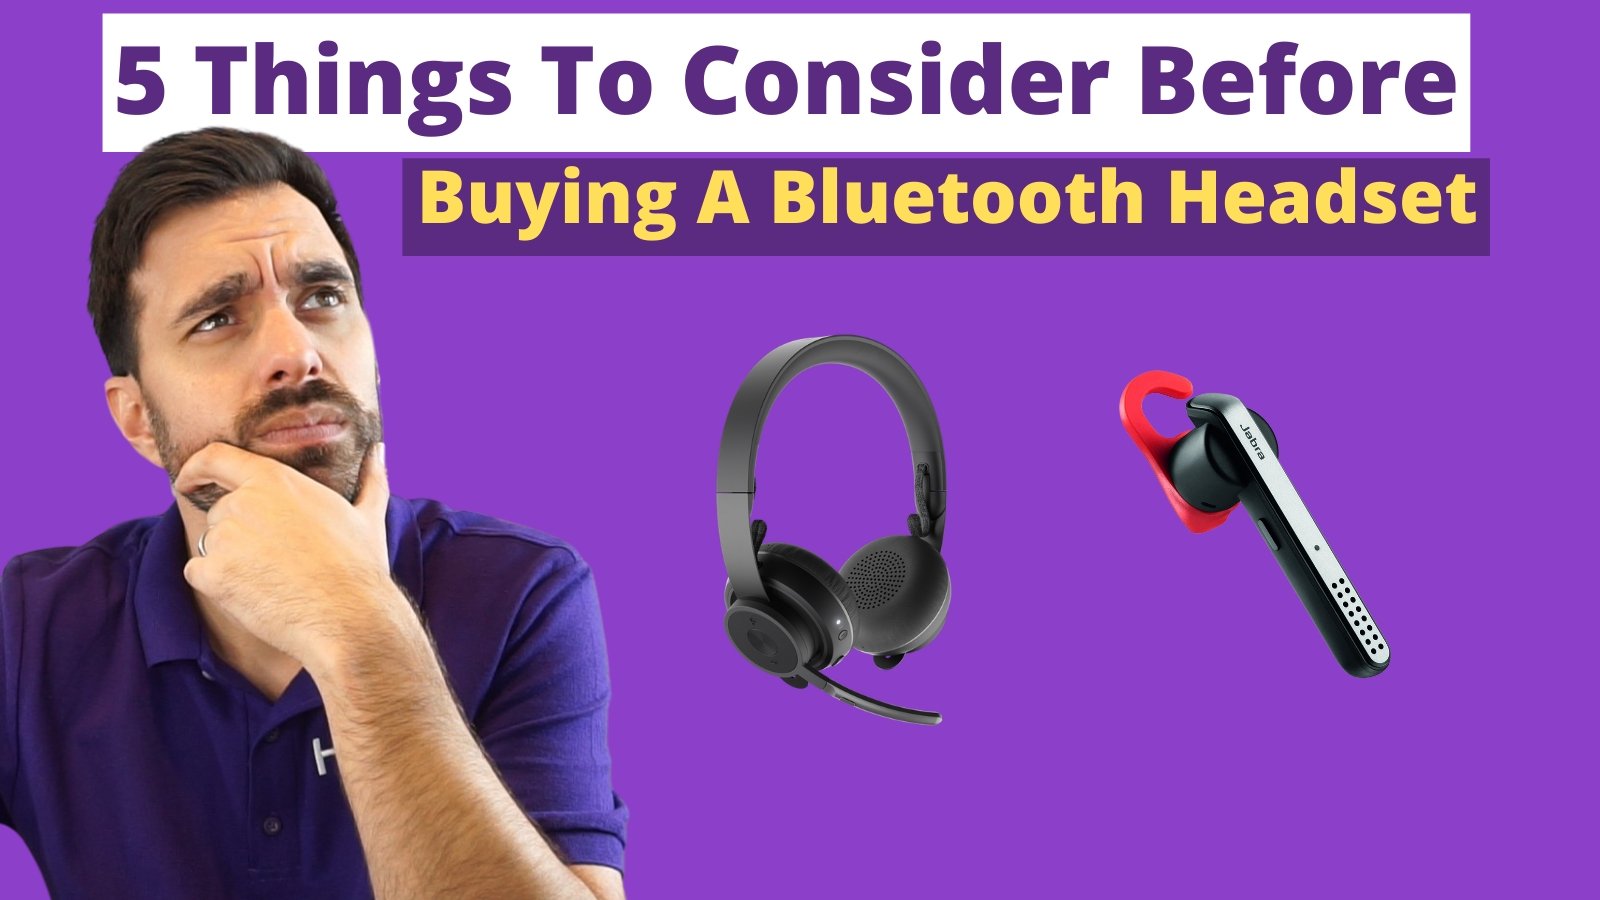 5 Things To Consider Before Buying A Bluetooth Headset - Headset Advisor